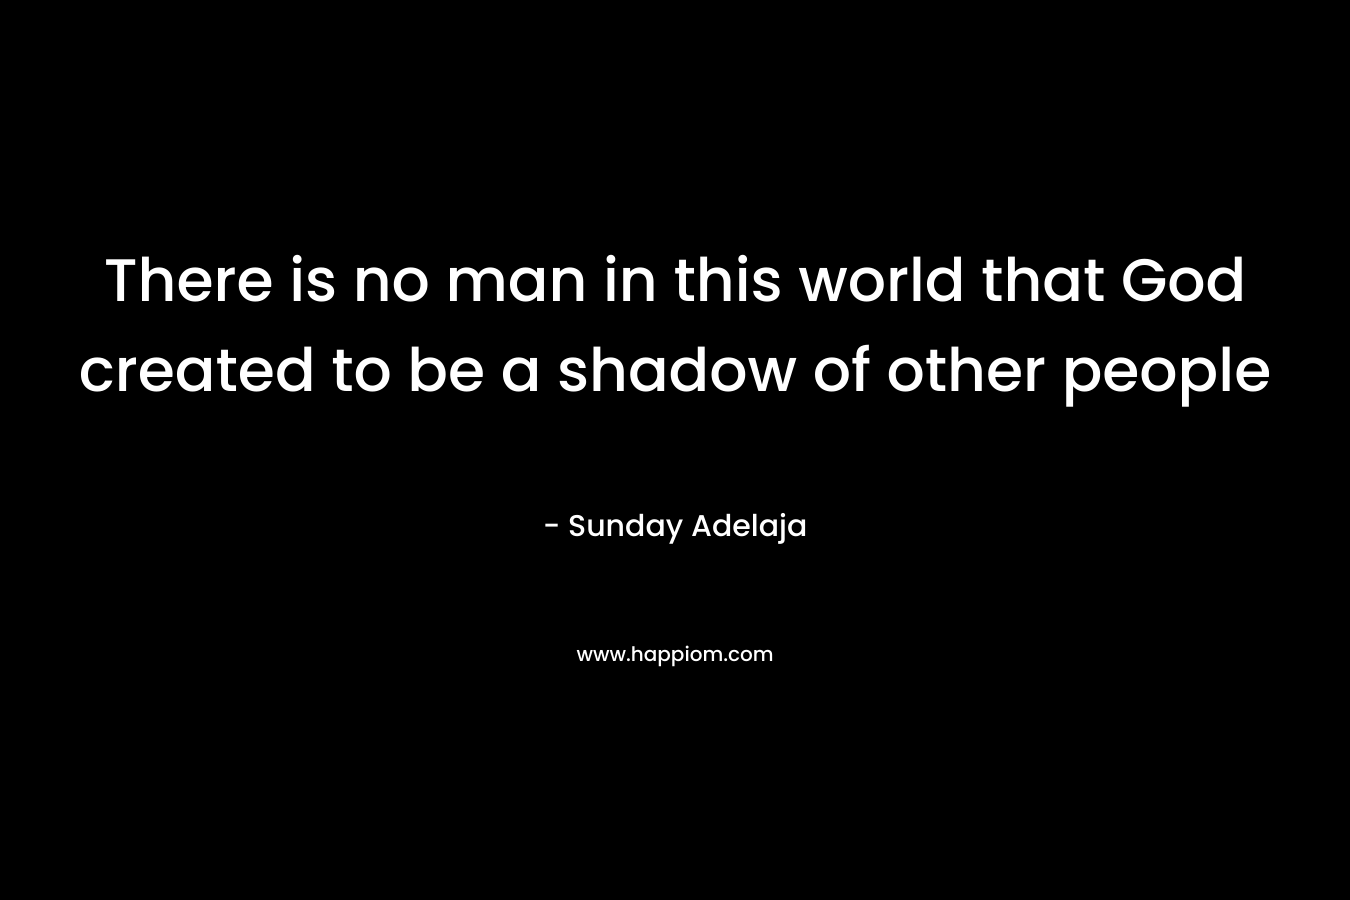 There is no man in this world that God created to be a shadow of other people